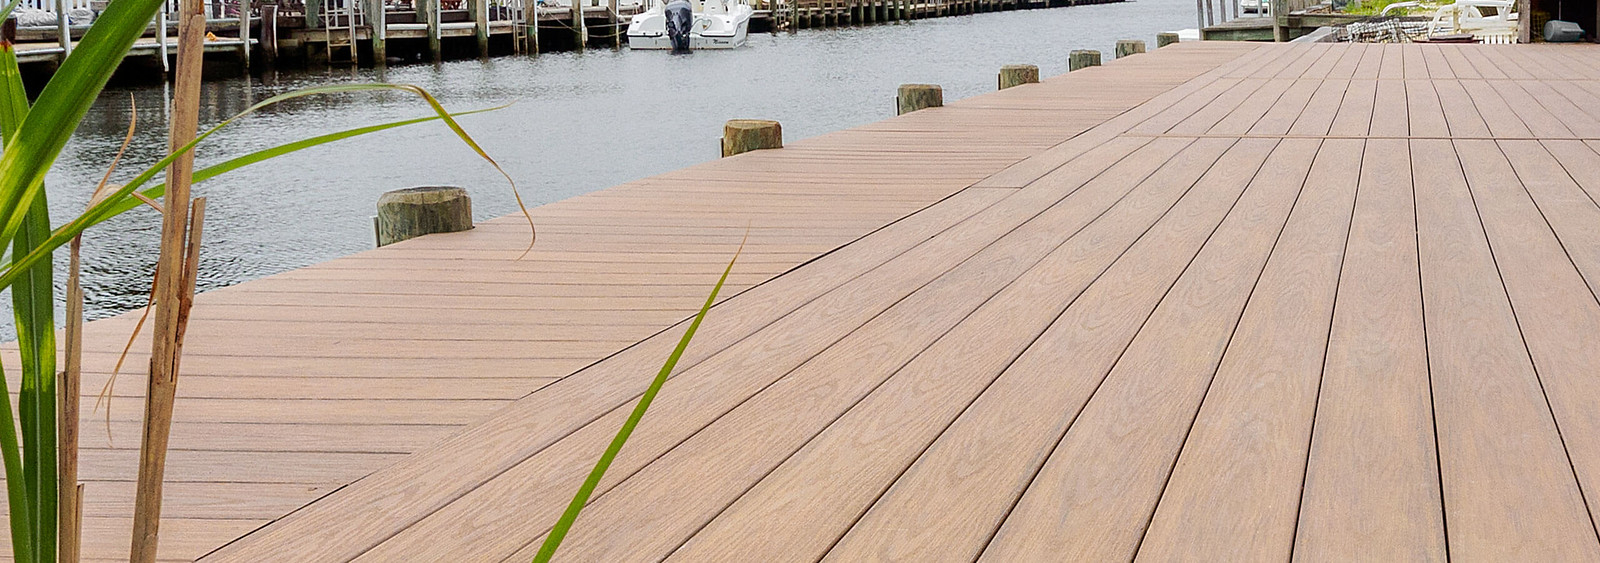 Wolf Pvc Outdoor Decking Materials Wolf Home Products intended for dimensions 1600 X 563